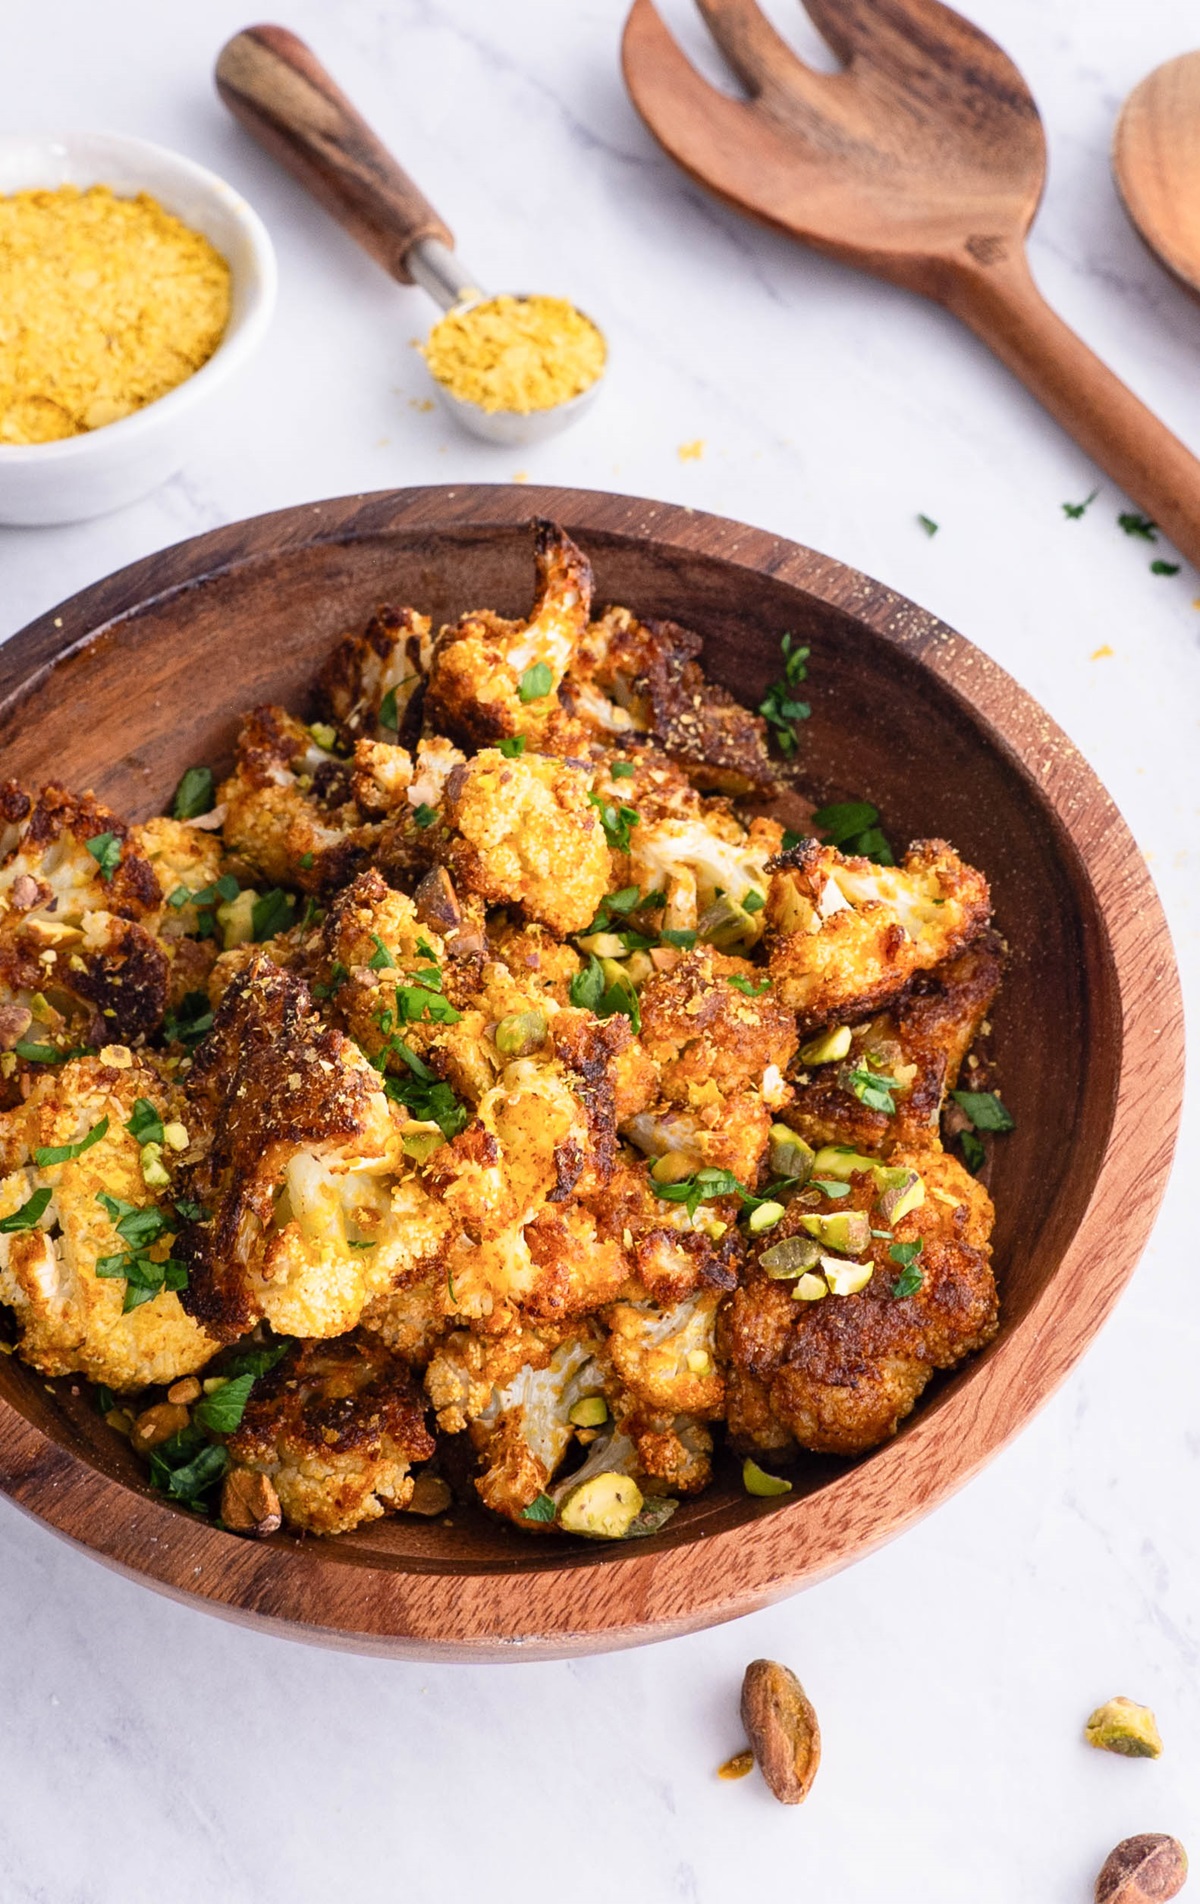 Wooden bowl full of cheesy vegan roasted cauliflower sprinkled with pistachios and ready to serve.